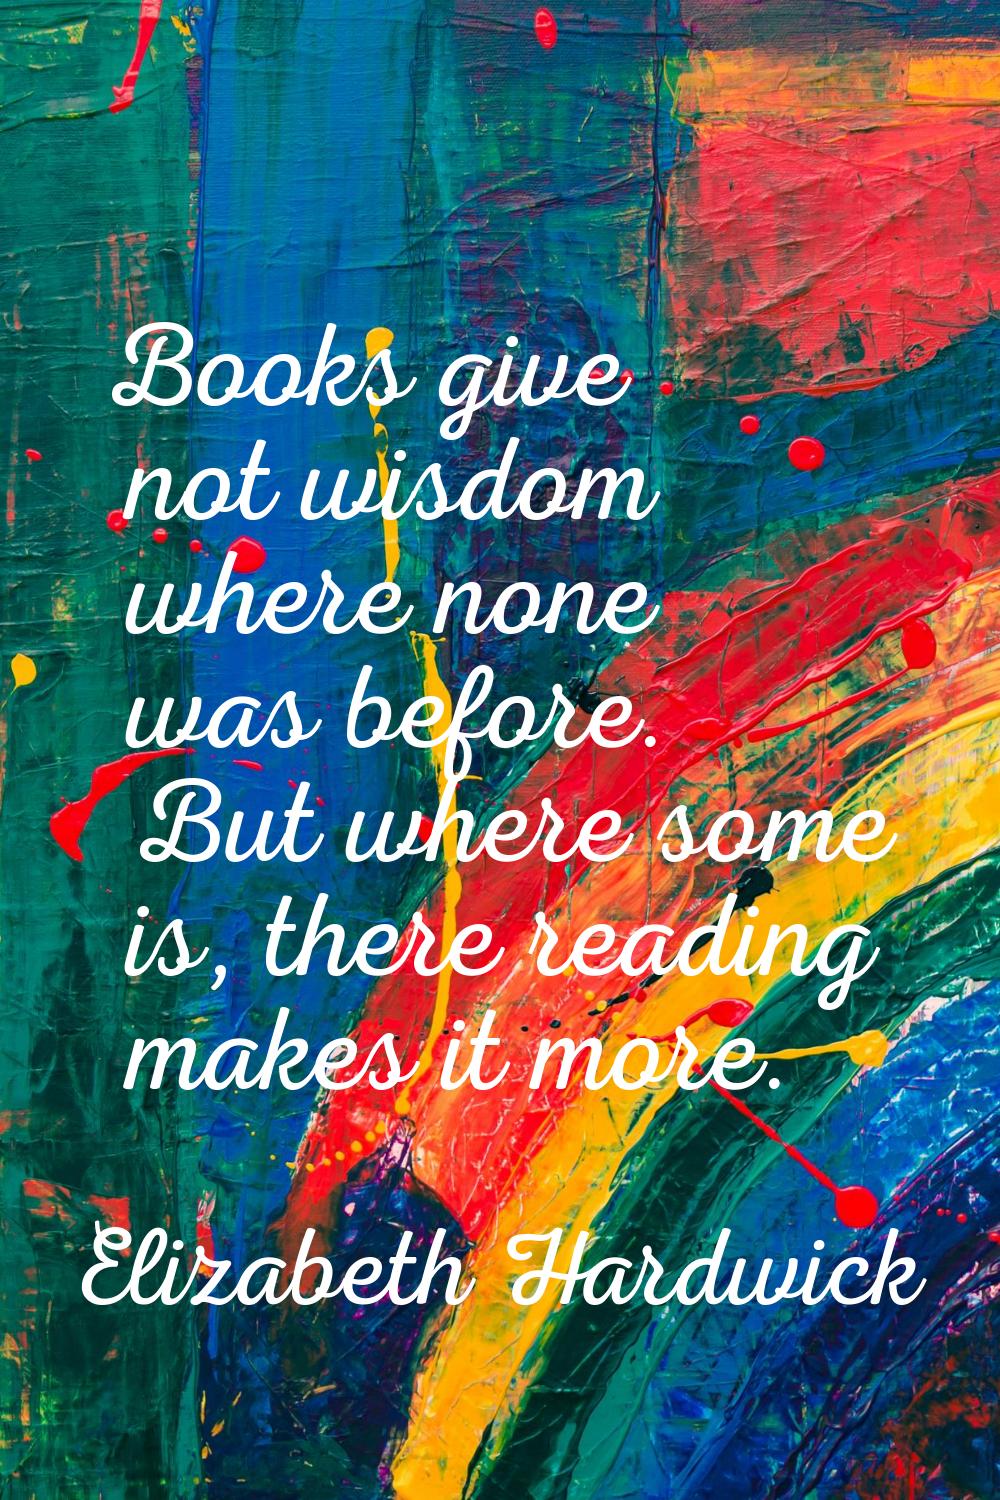 Books give not wisdom where none was before. But where some is, there reading makes it more.